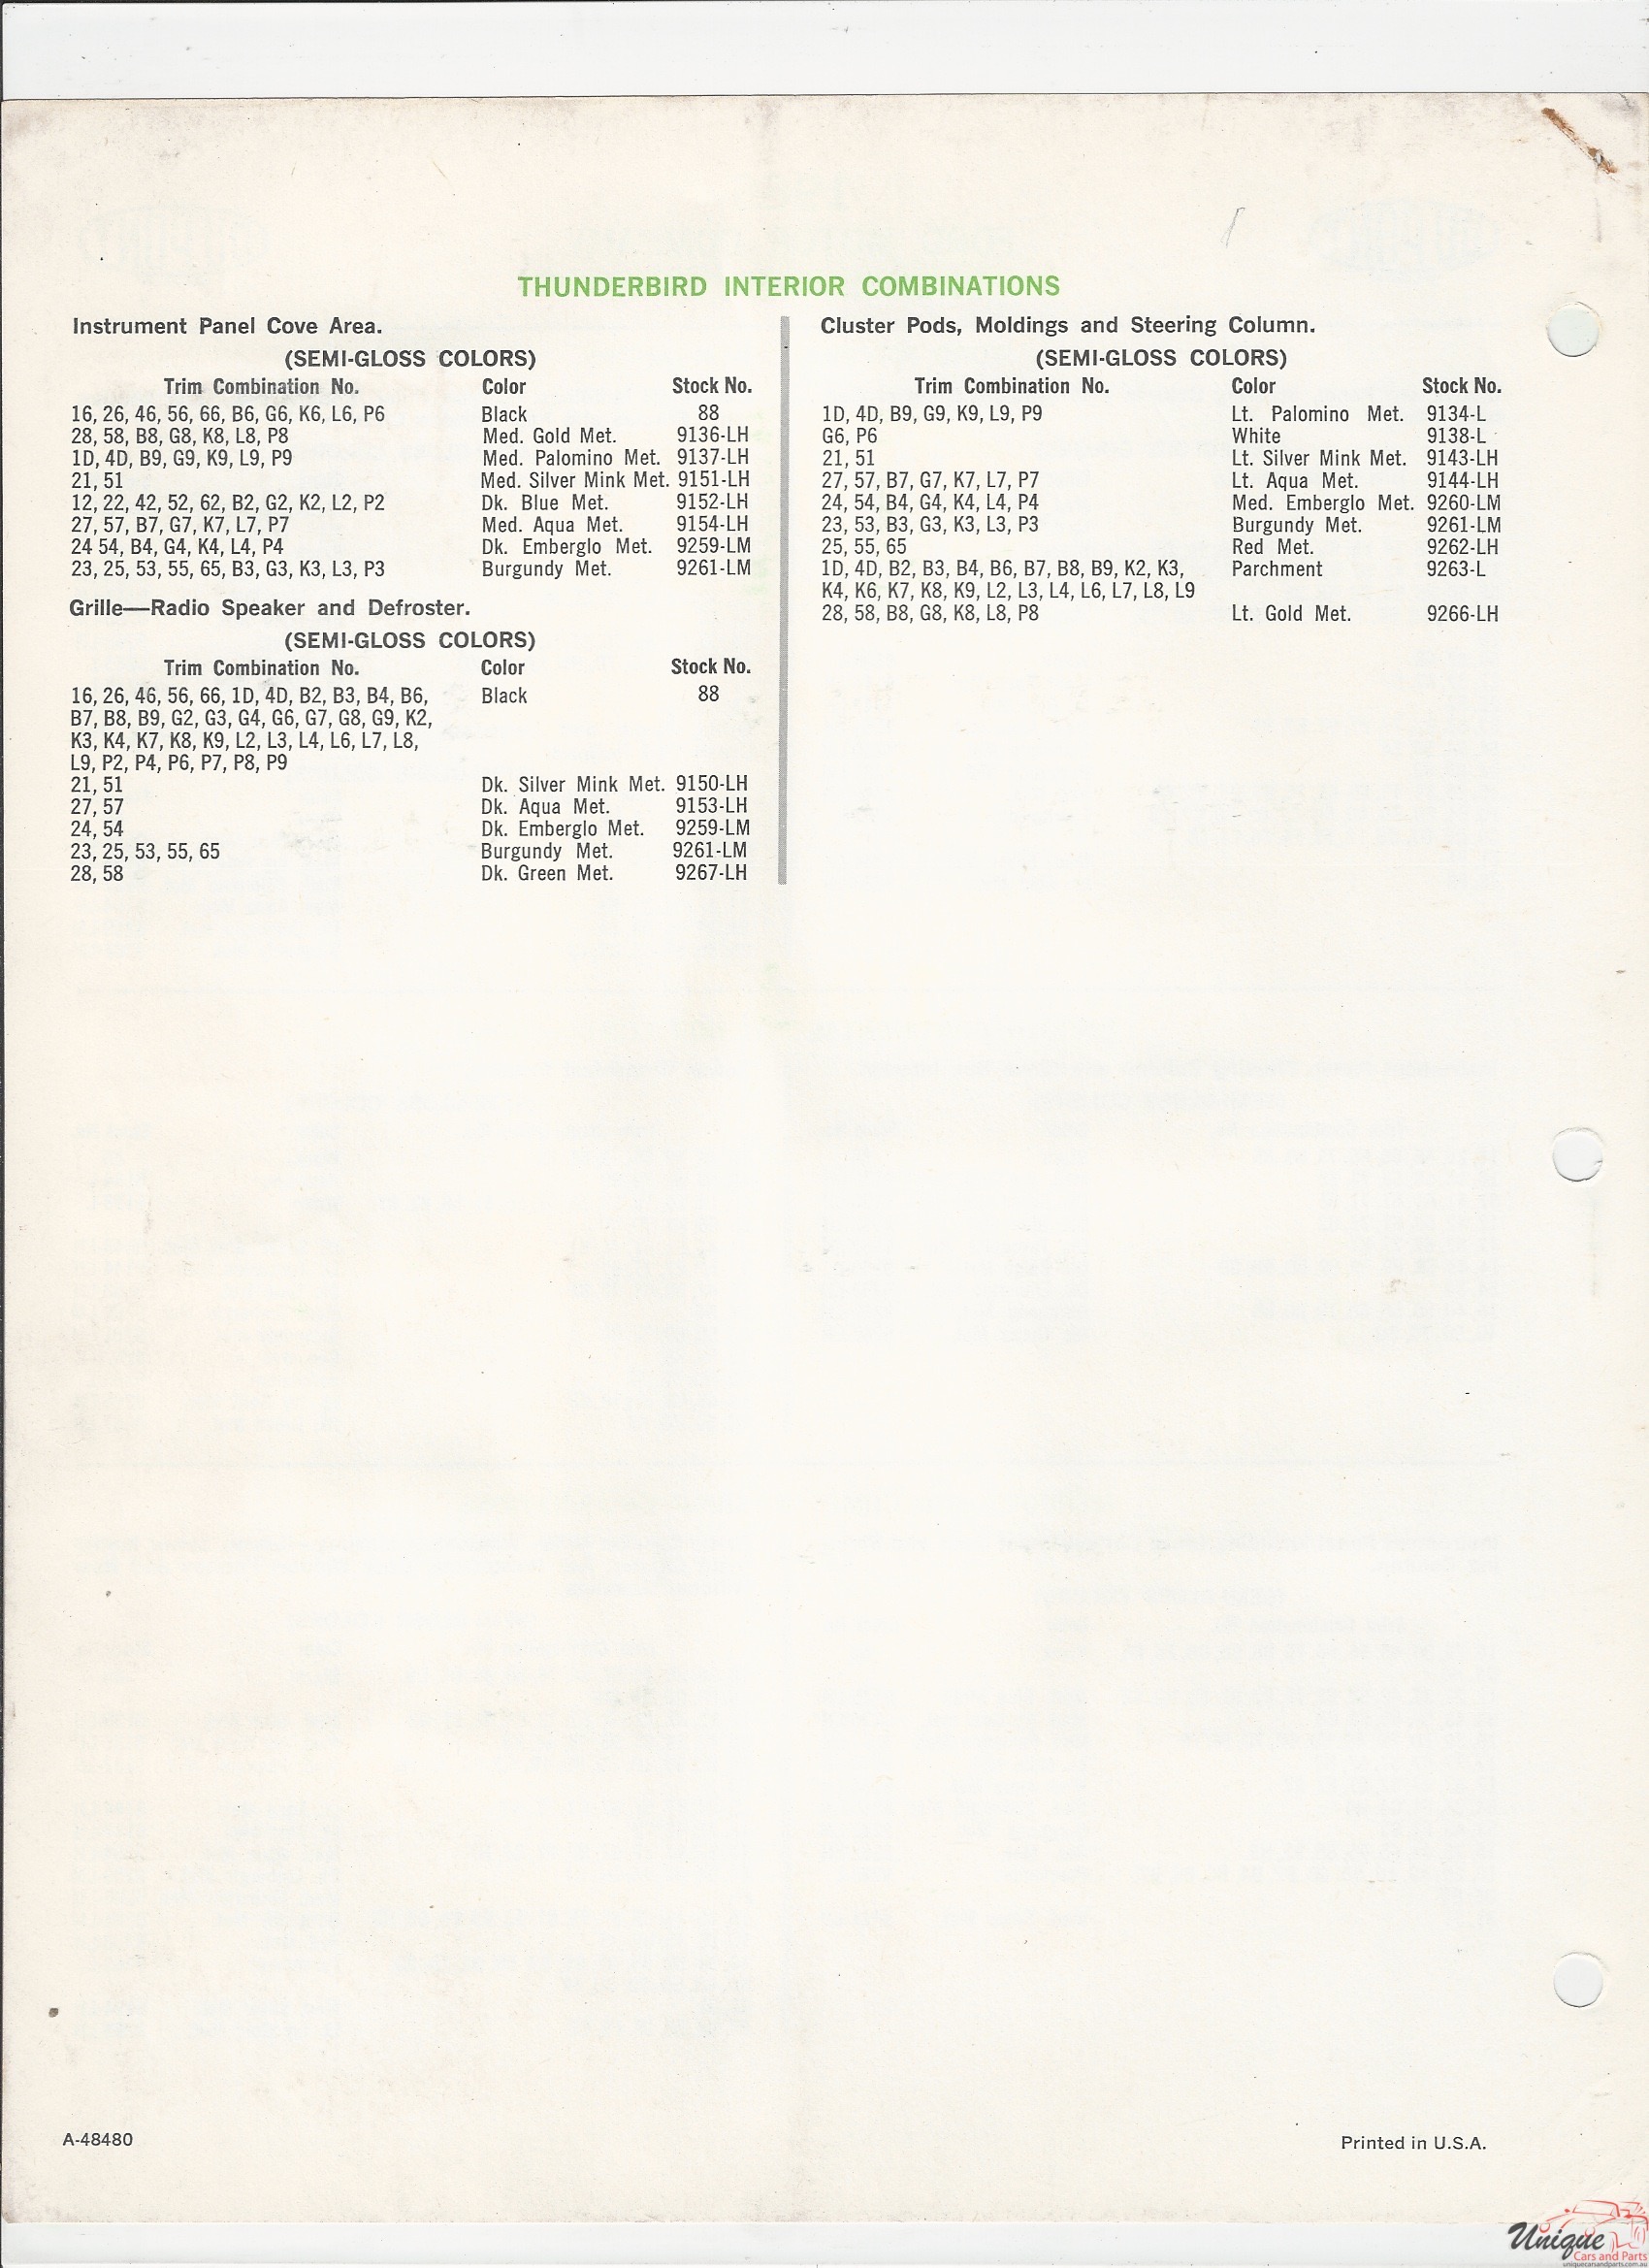 1966 Ford-1 Paint Charts